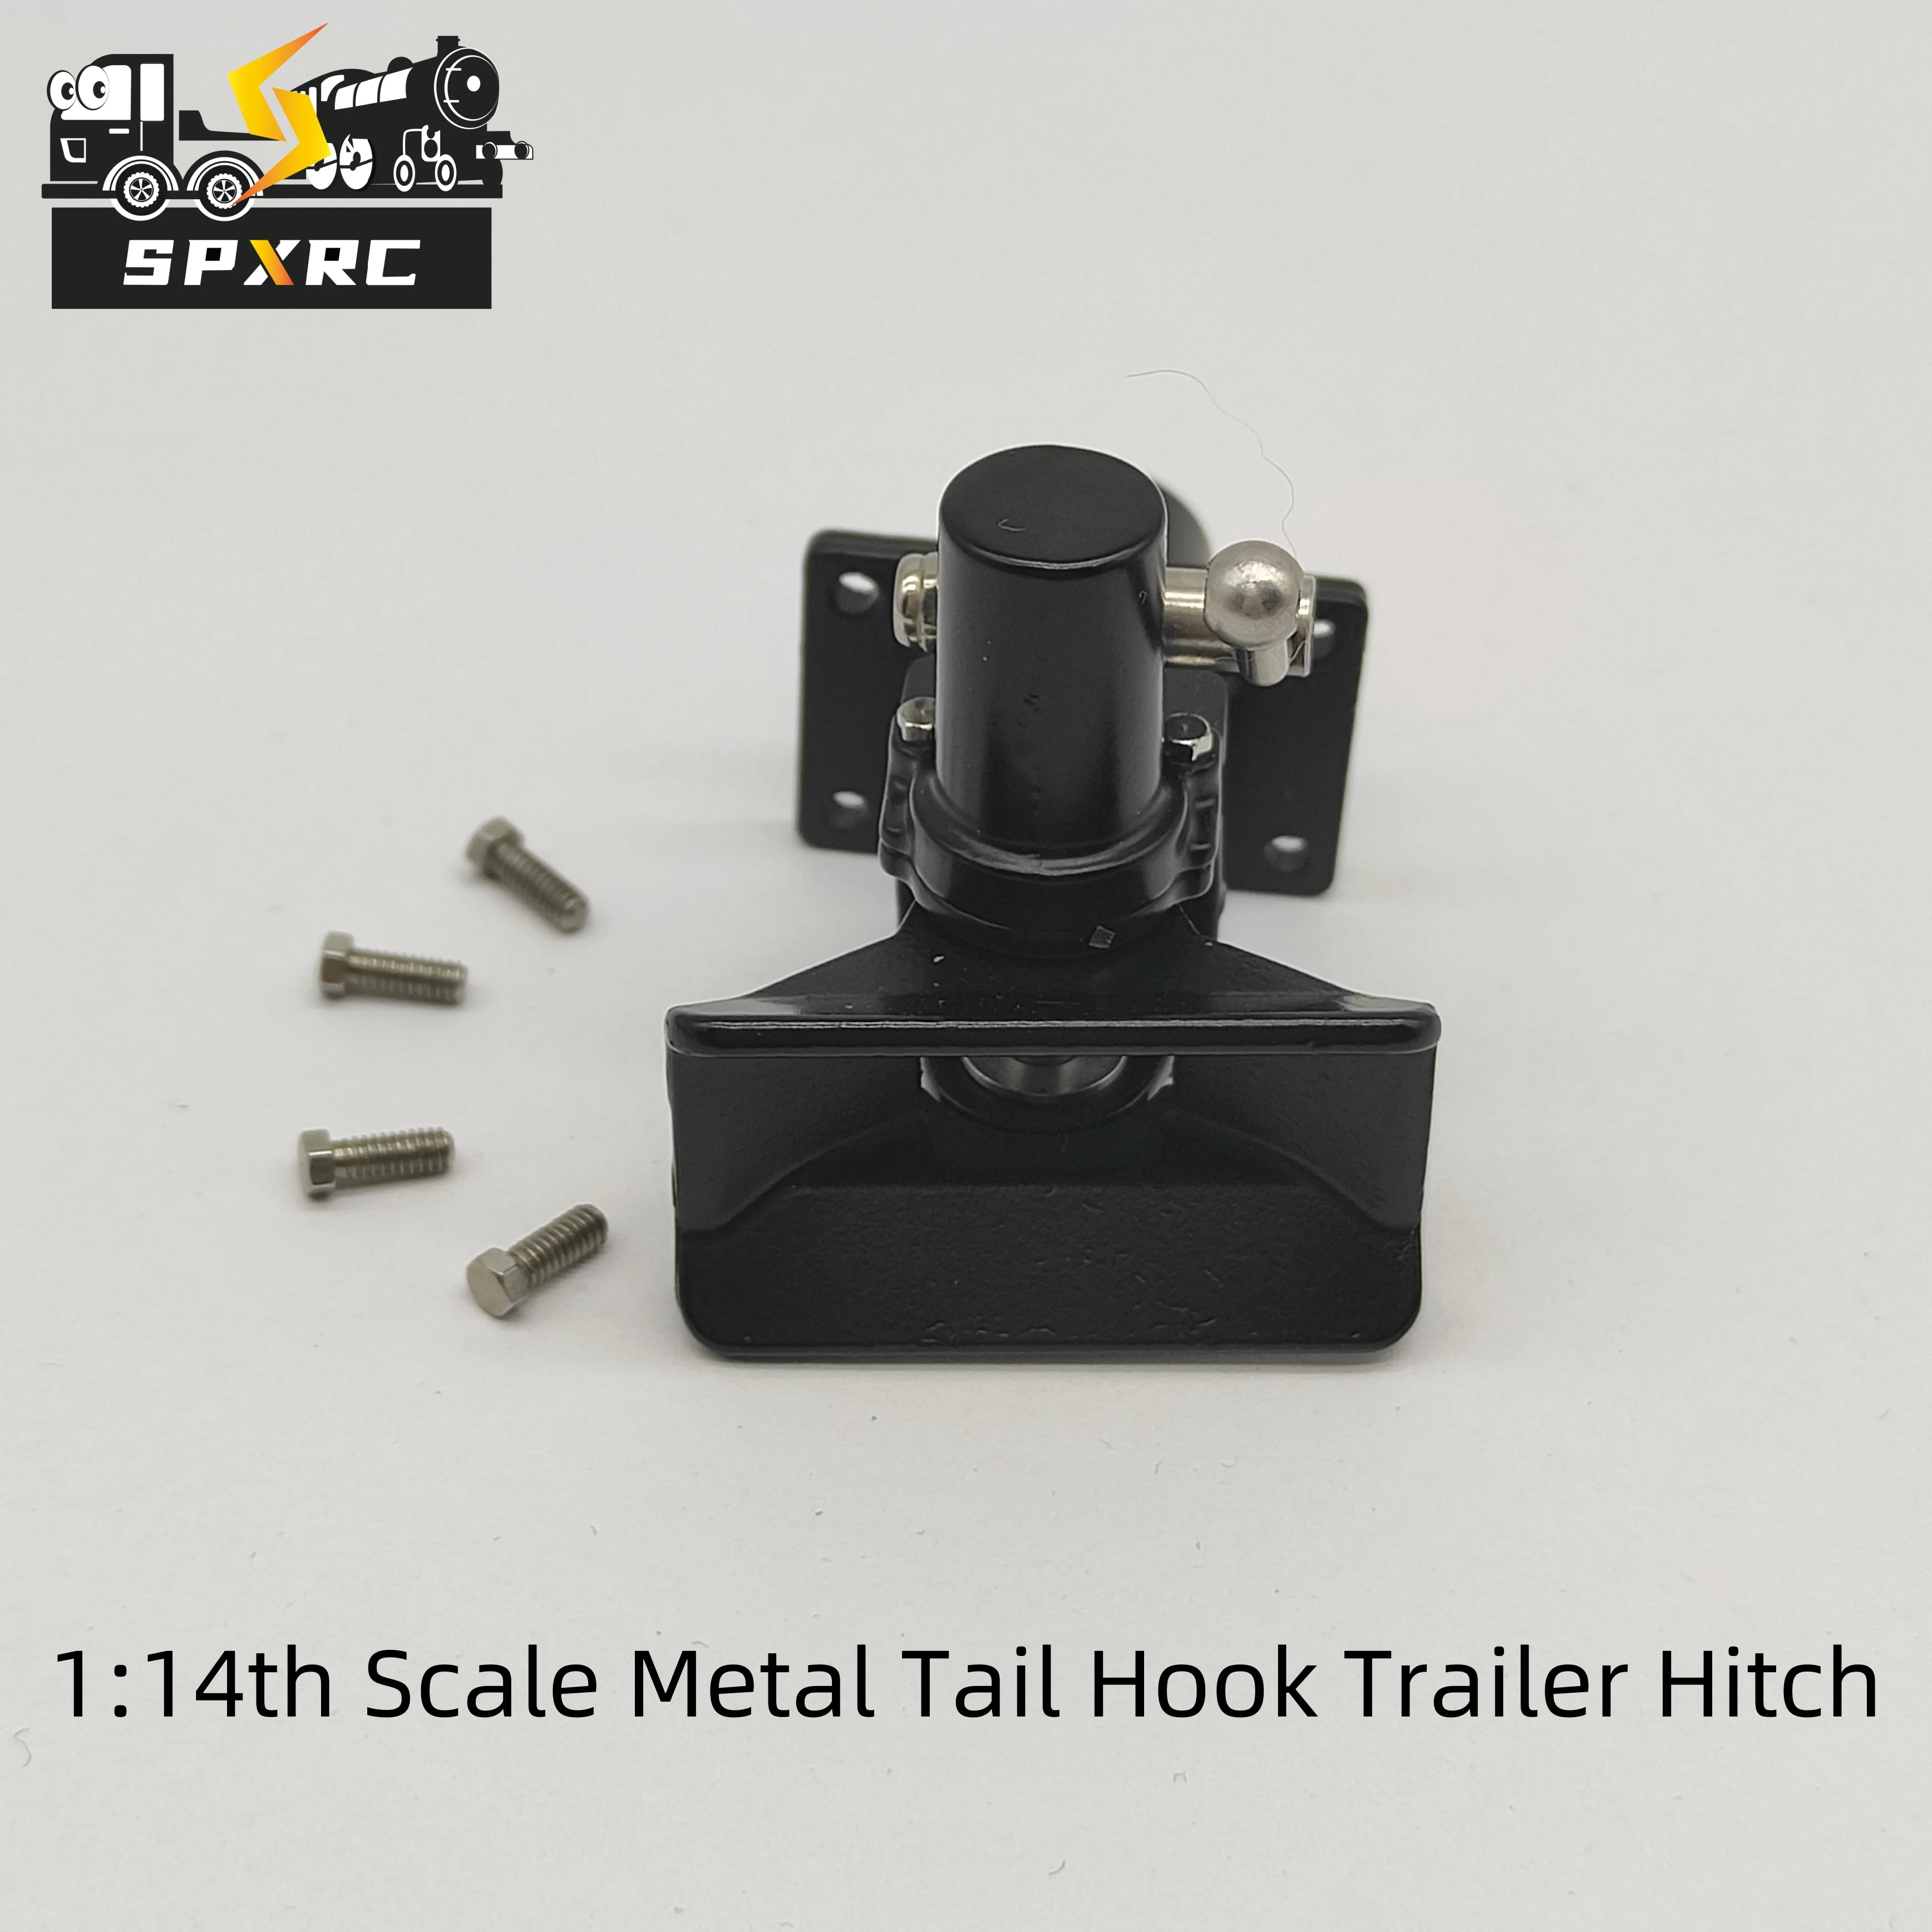 

1:14th Scale Metal Tail Hook Trailer Hitch for KABOLITE K3363 Tamiya RC Dump Truck SCANIA R620 VOLVO Arocs MAN Car Accessories